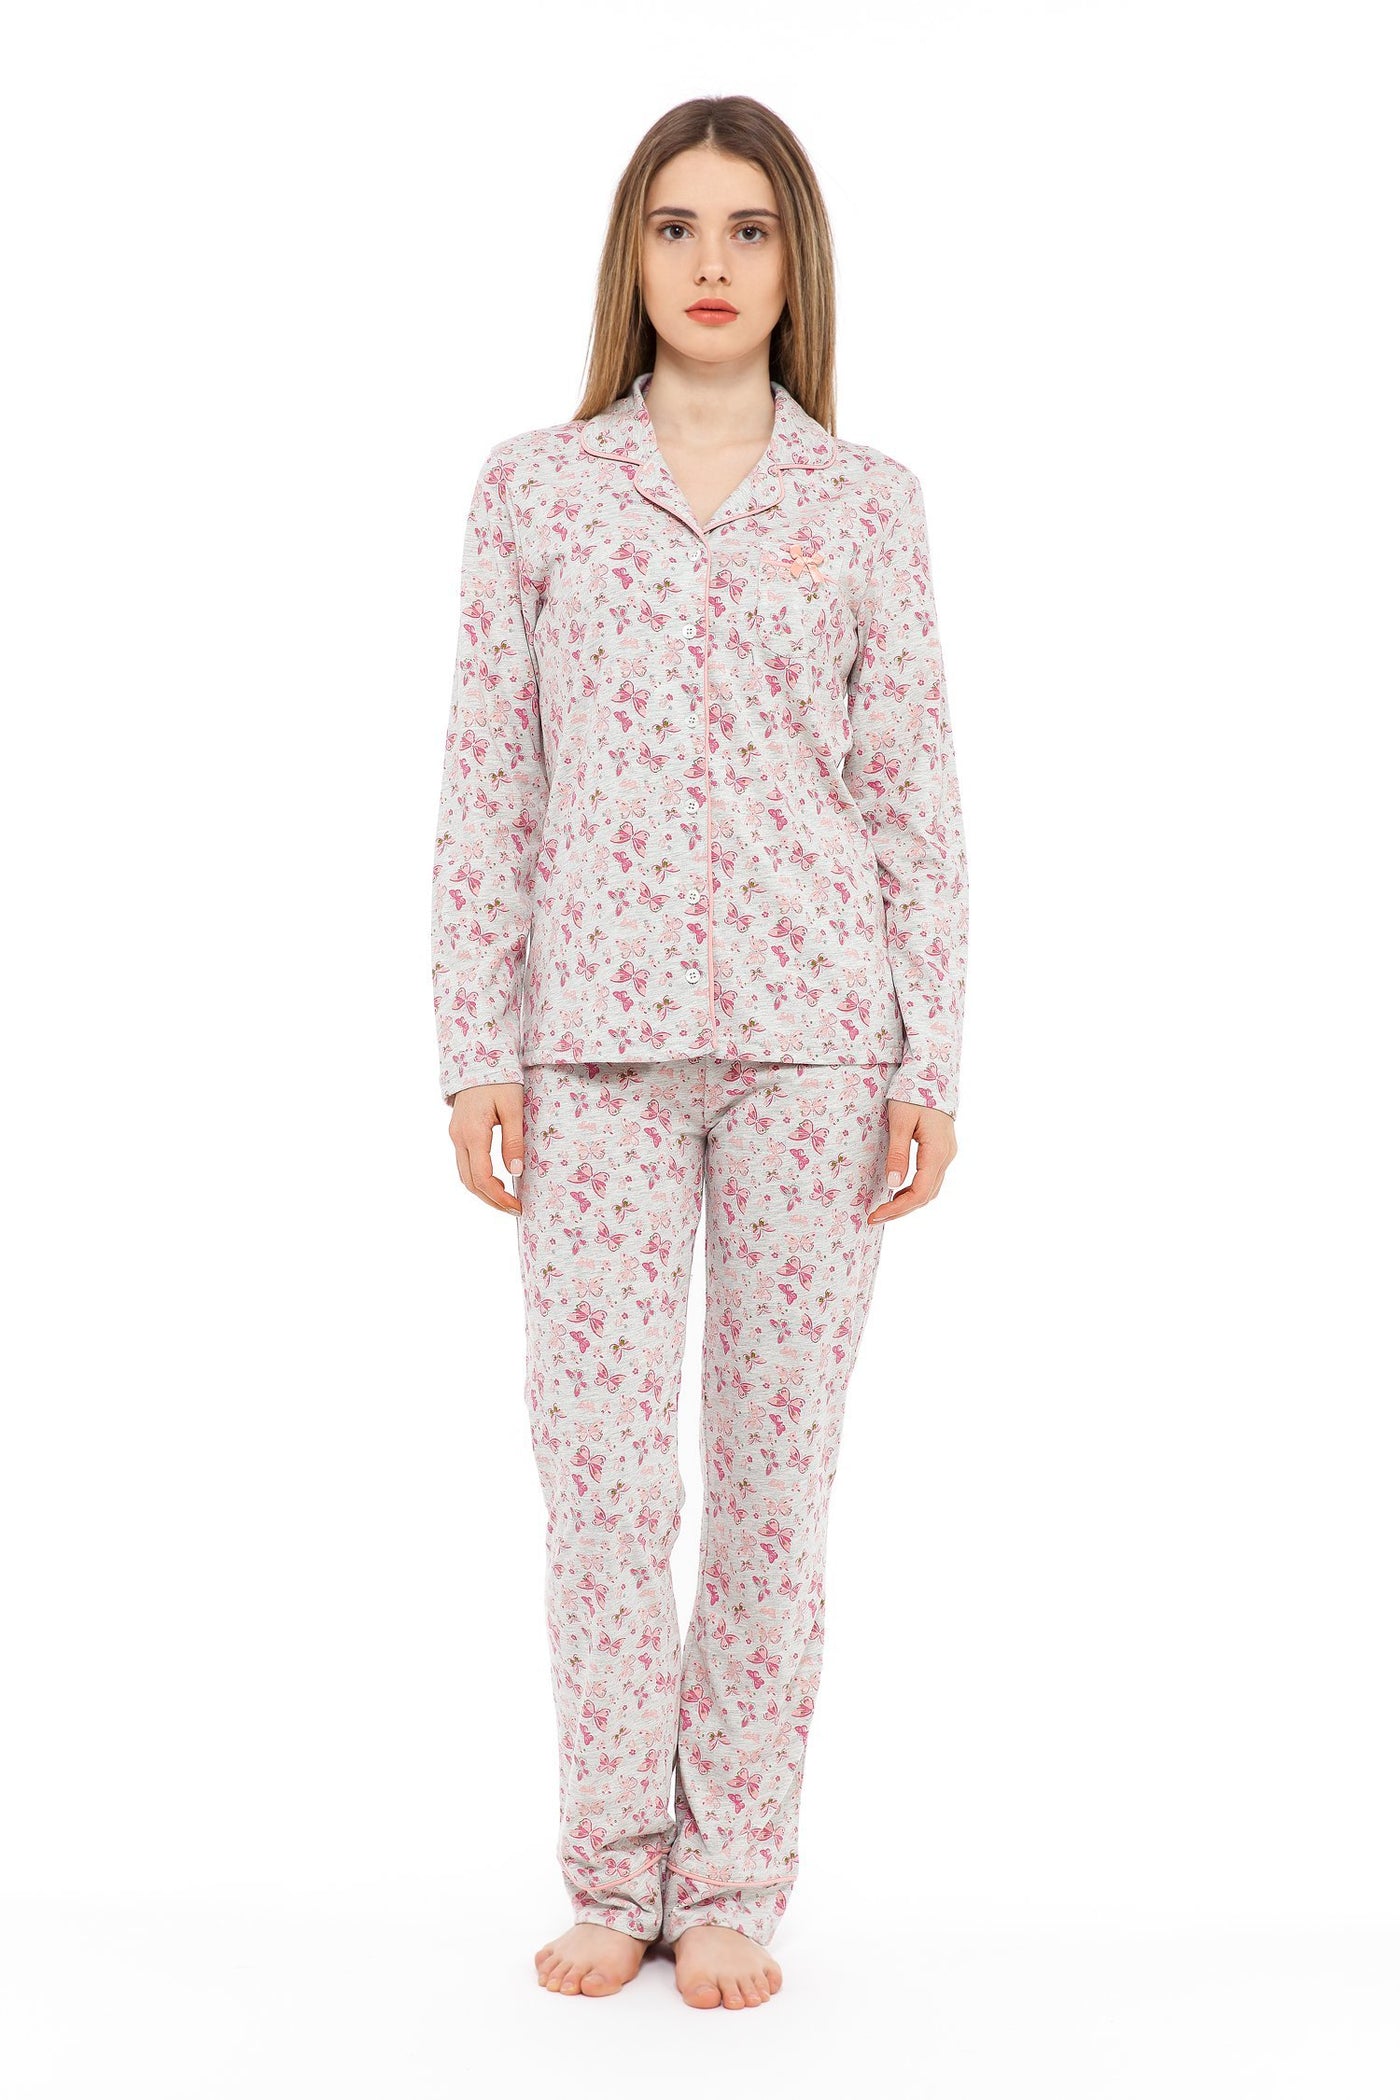 chassca jacket & pant pyjama set with butterfly print - Breakmood